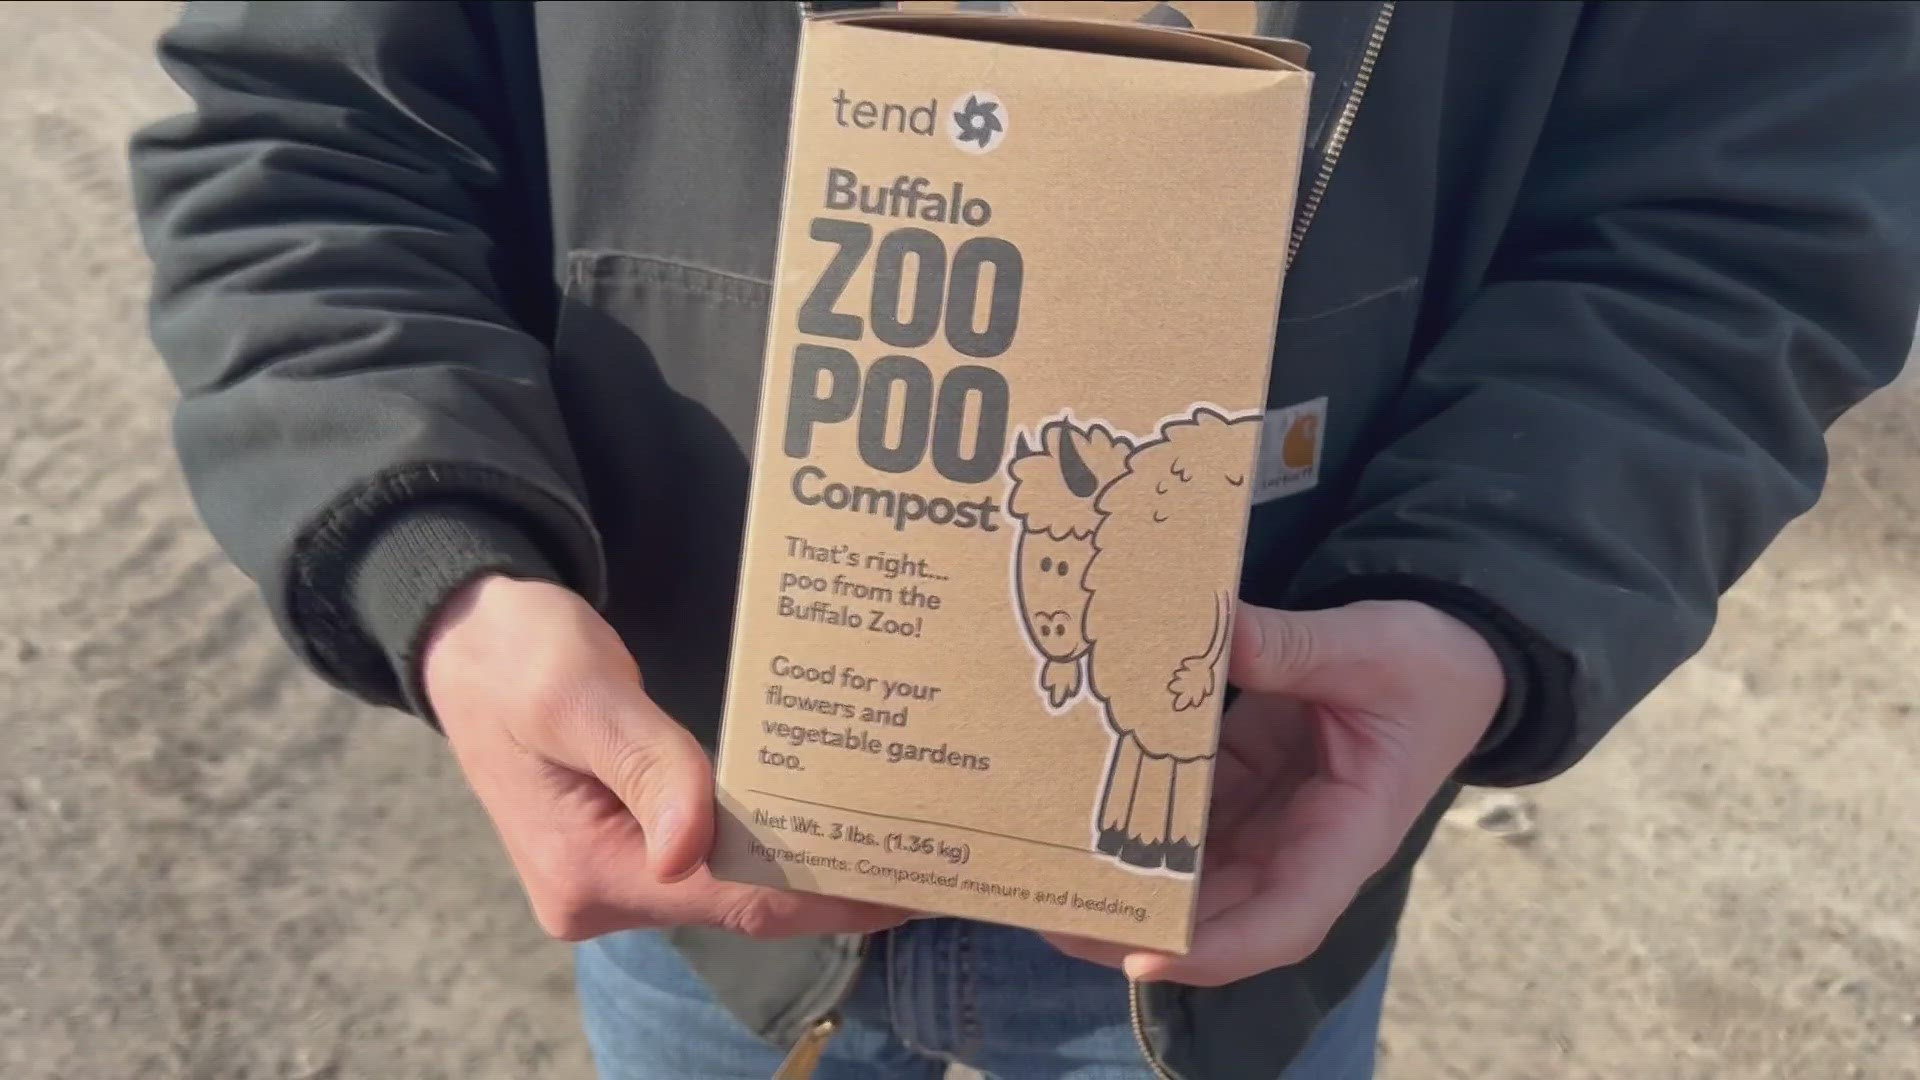 The finished product is called Zoo Poo, and it's for sale at various garden centers across Western New York.